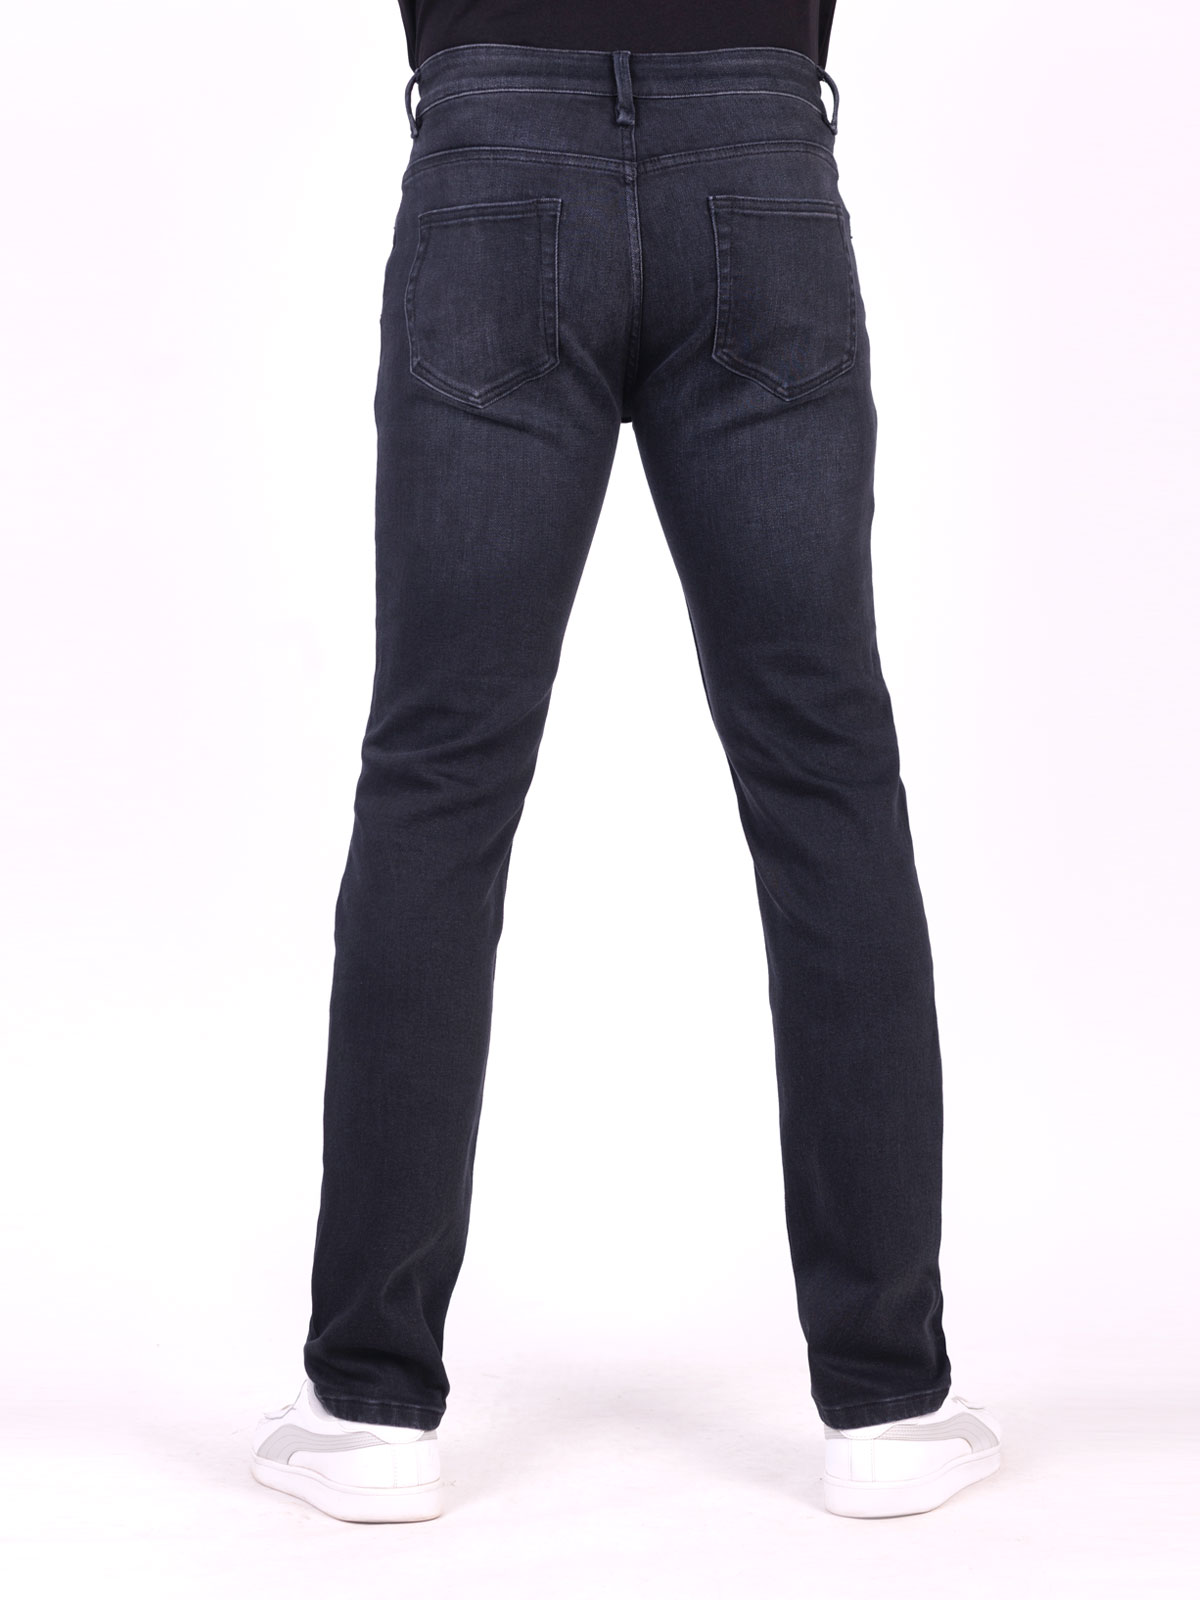 Mens black jeans with trit effect - 62169 € 66.93 img2